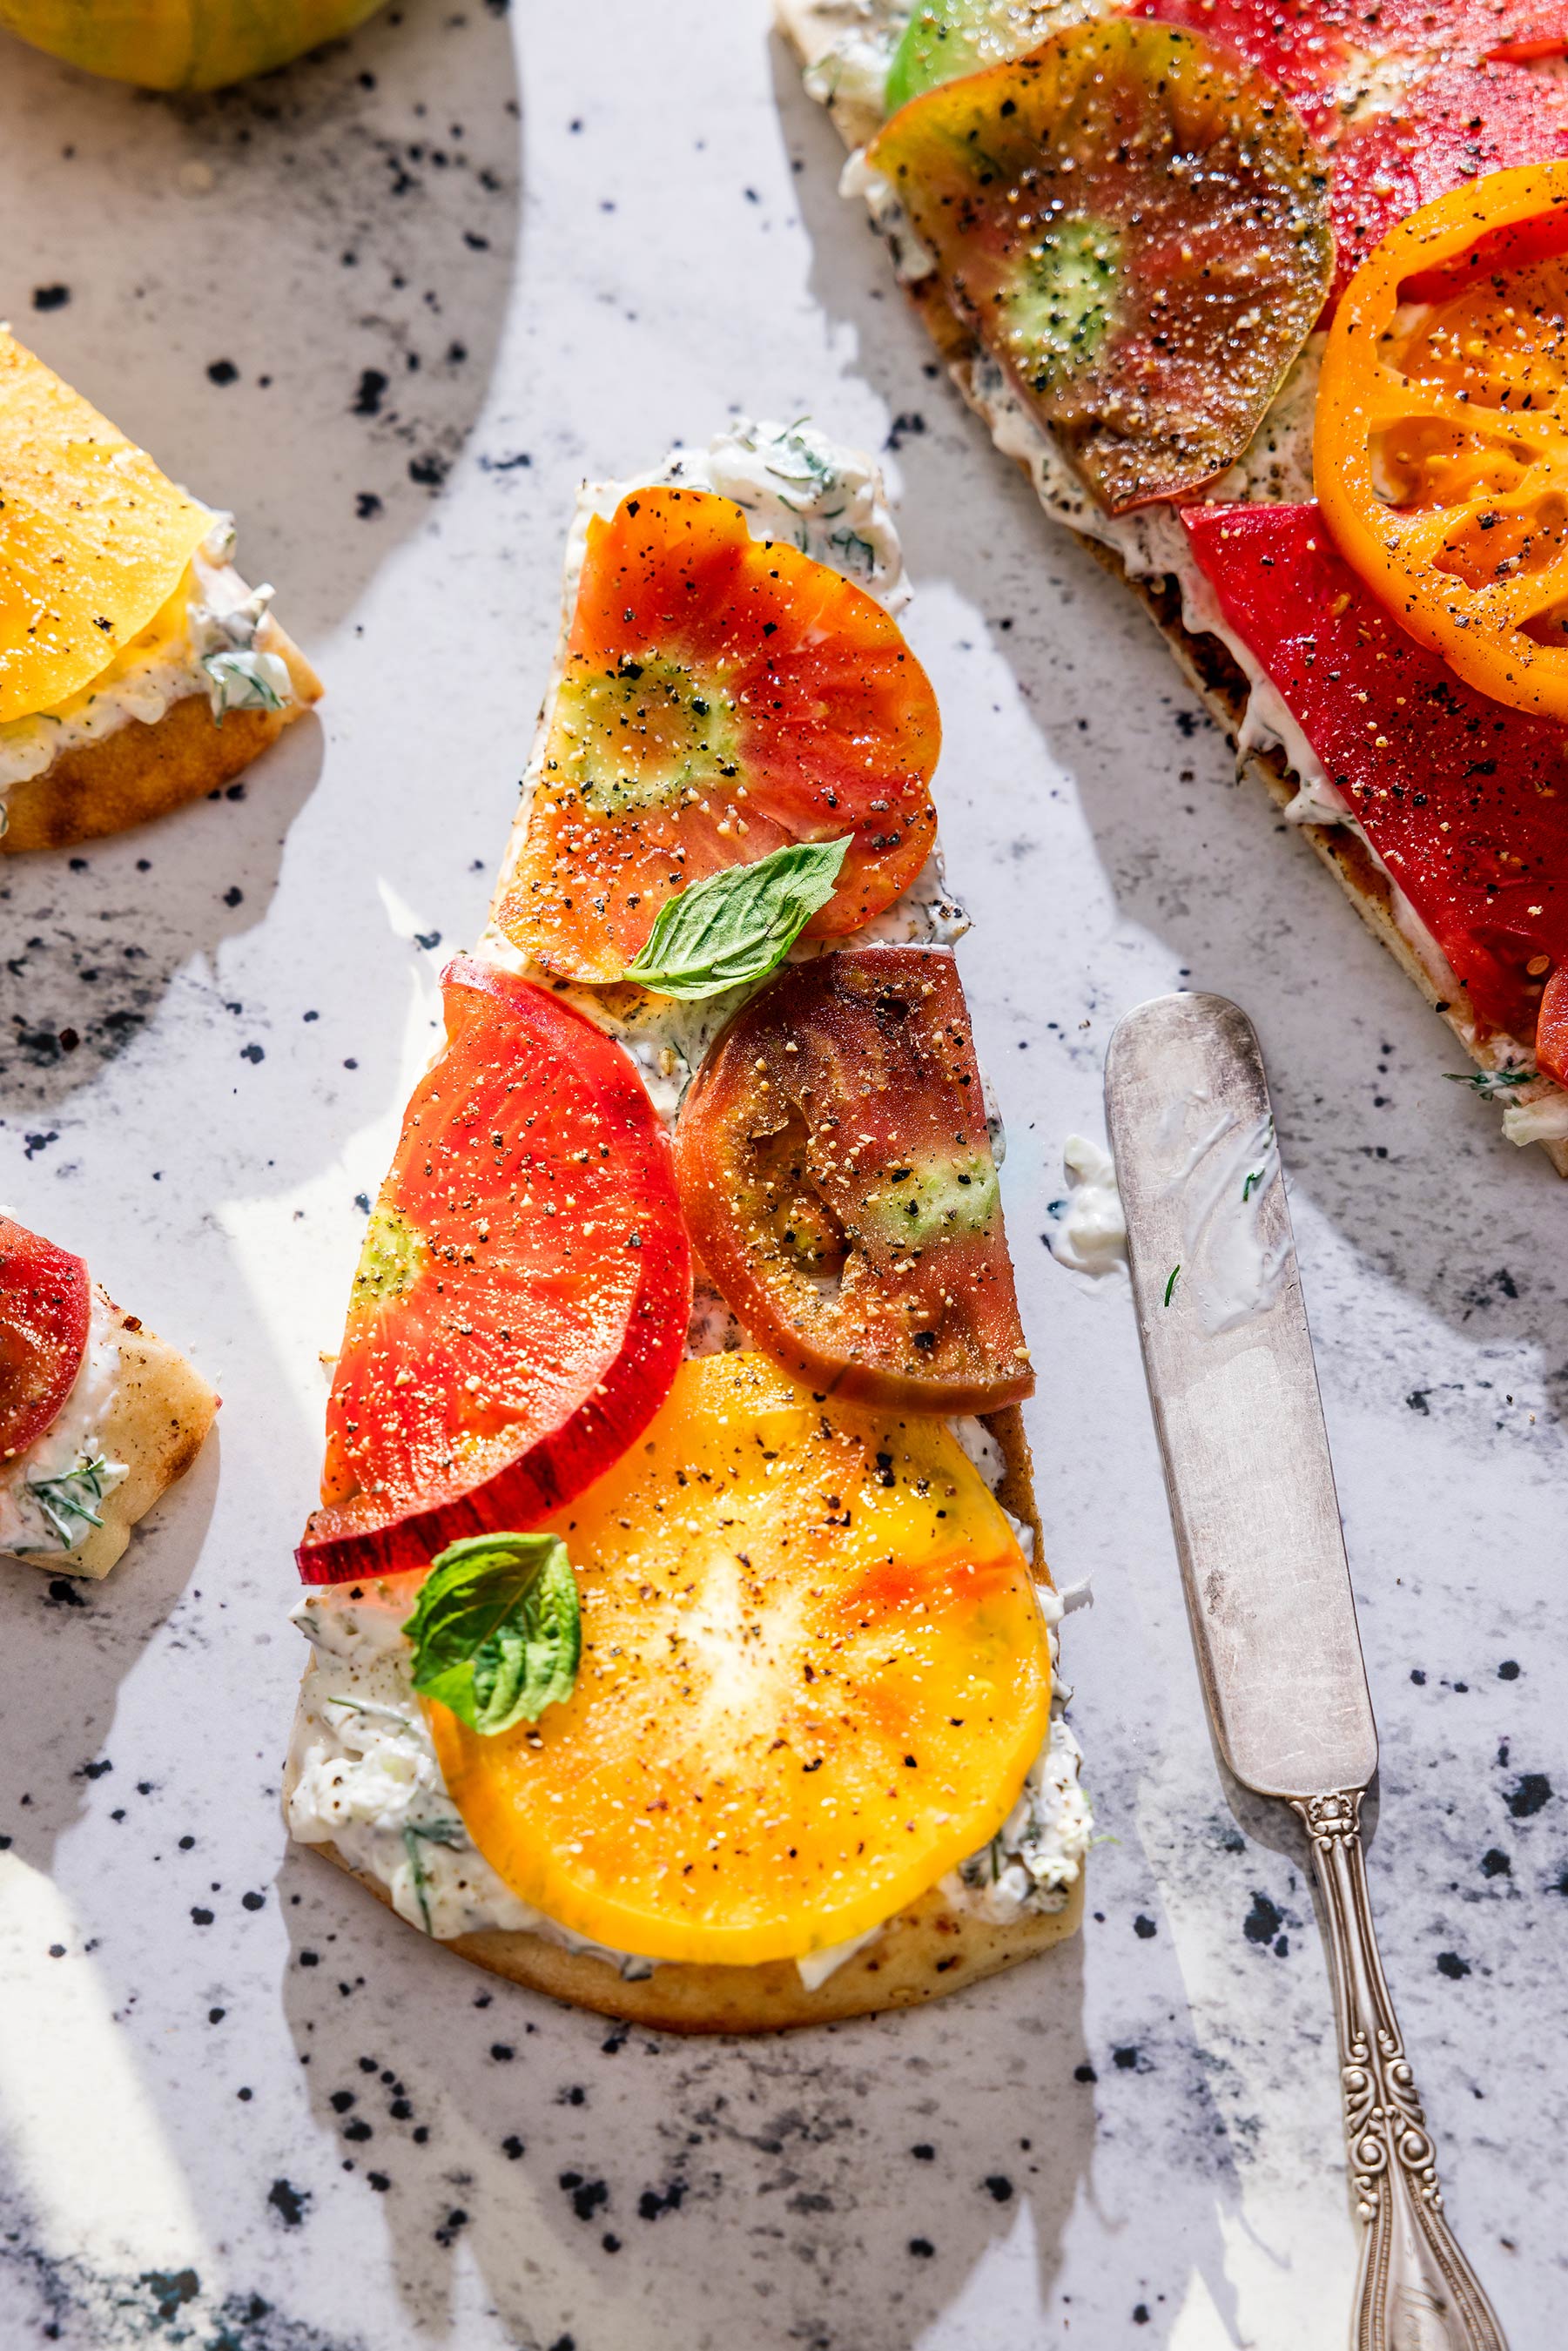 Glanger Photography | Close up of Heirloom tomatoes on toast with tzatziki sauce shot overhead.